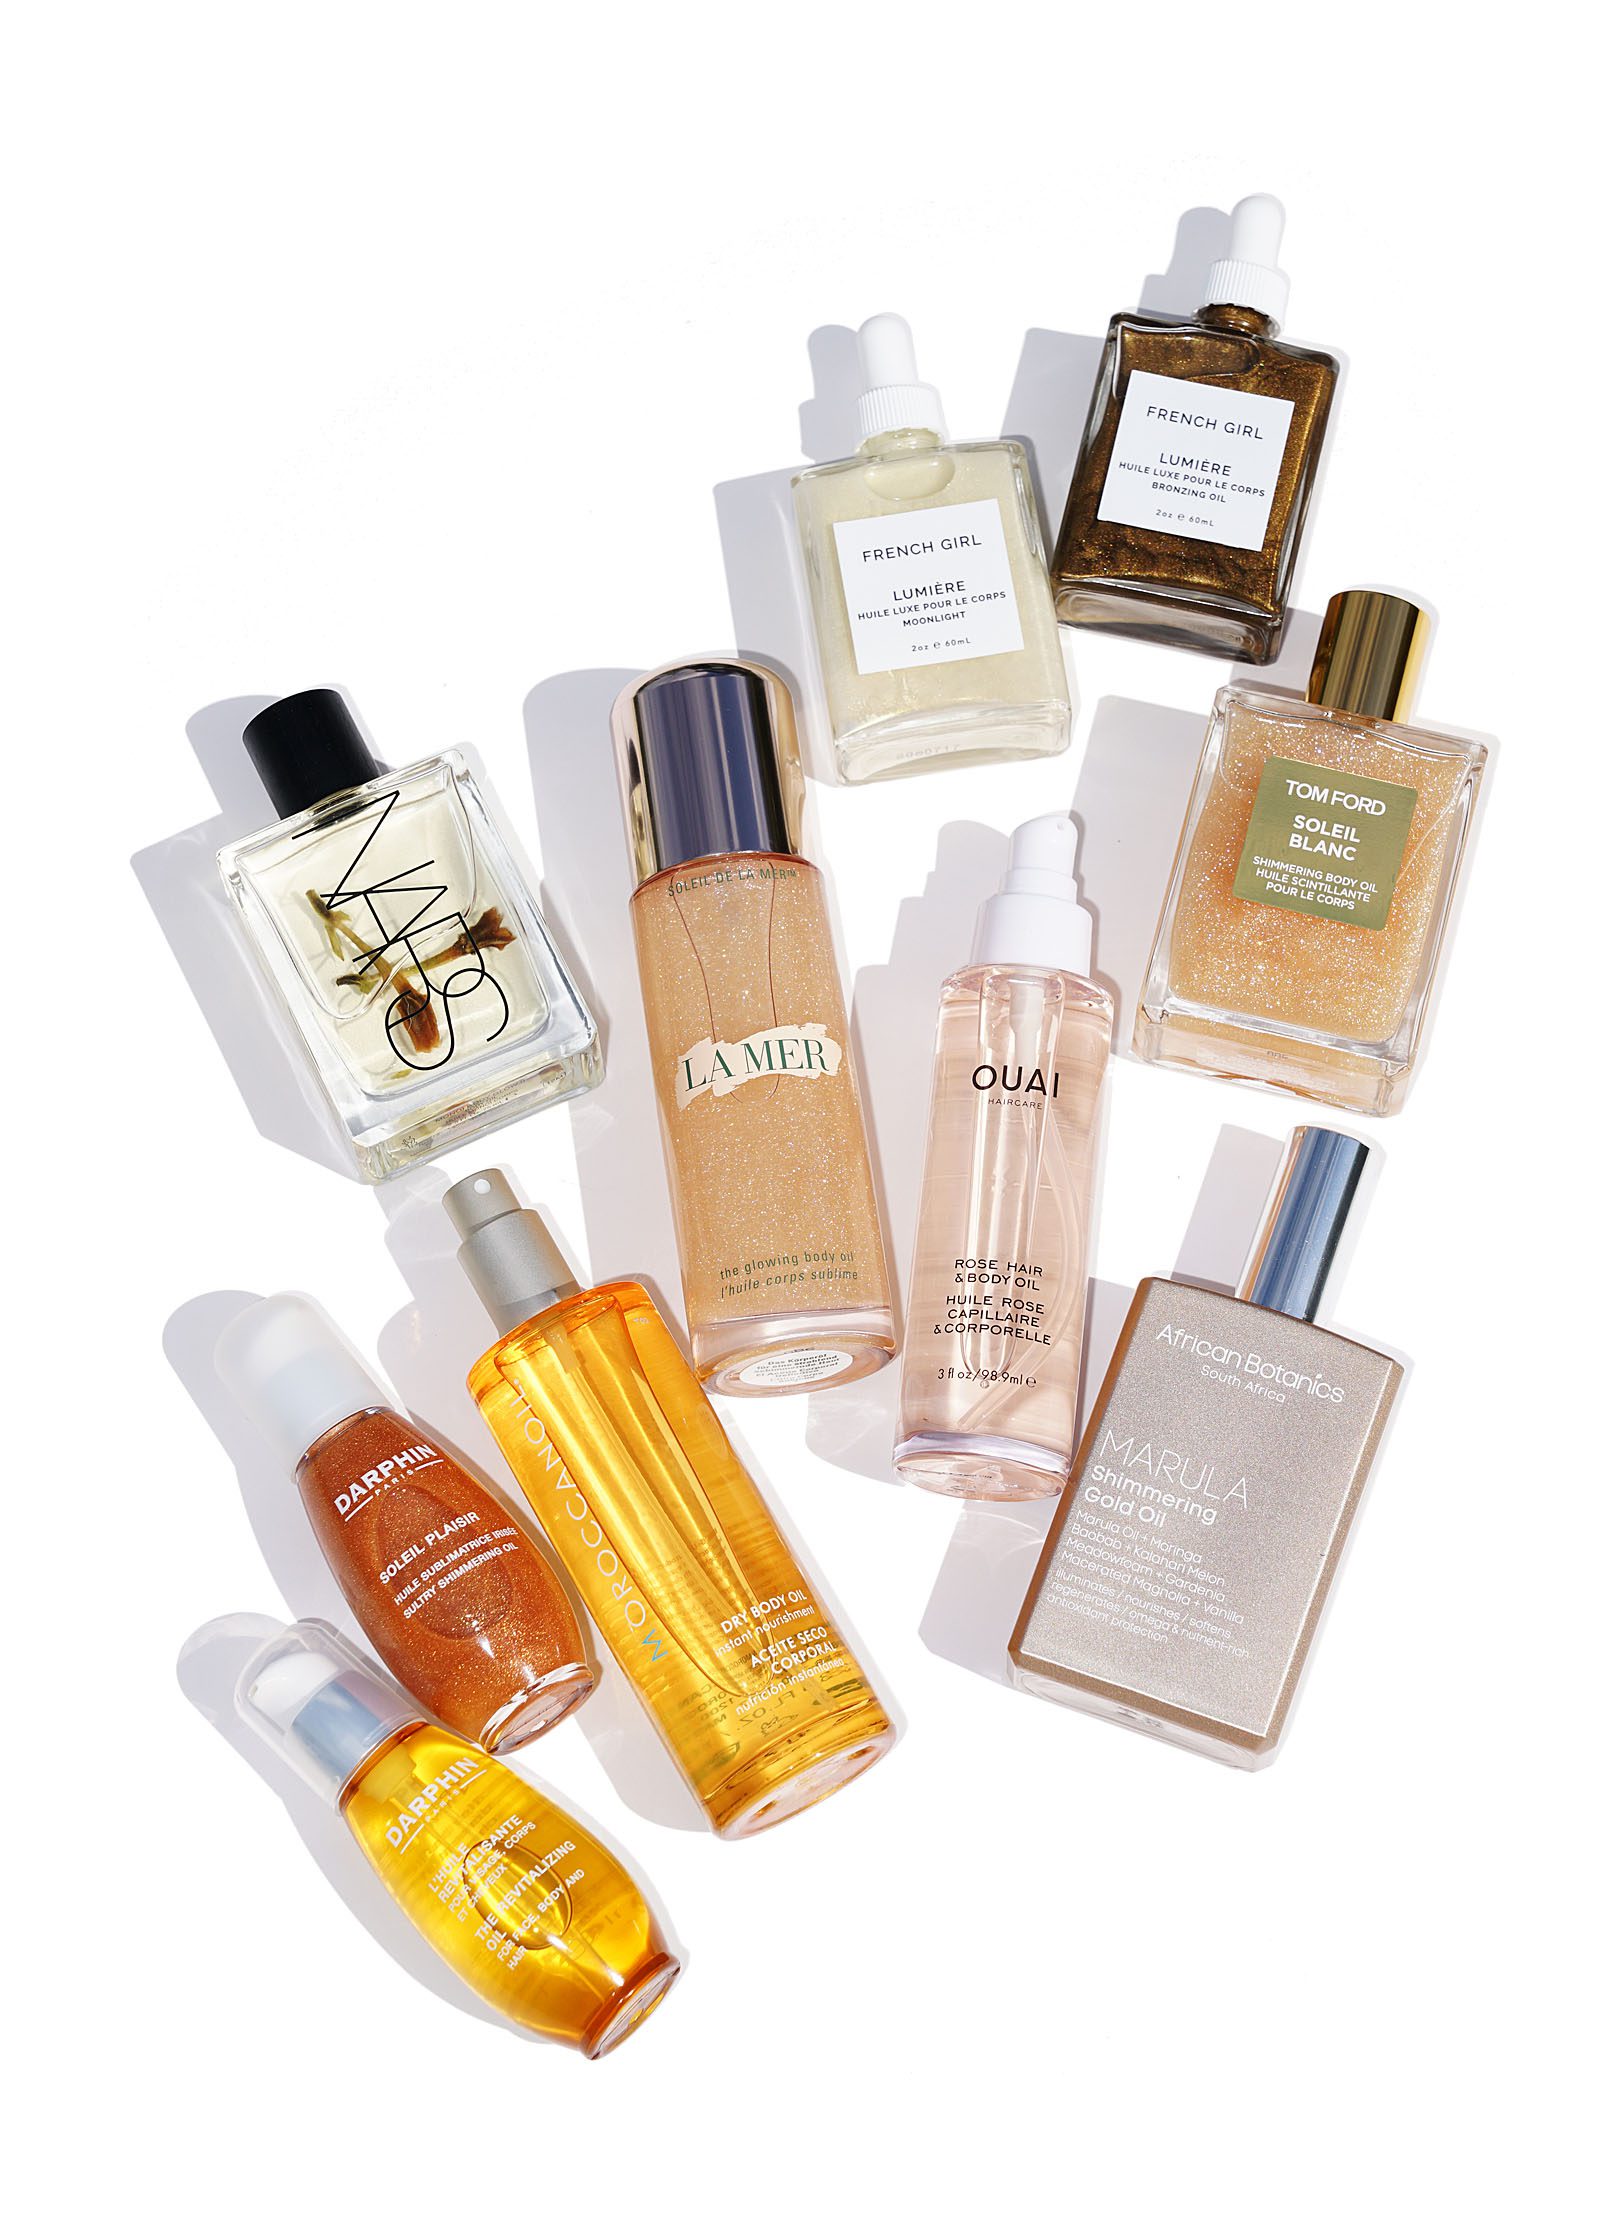 Summer Body Oils for Soft and Glowing Skin - The Beauty Look Book